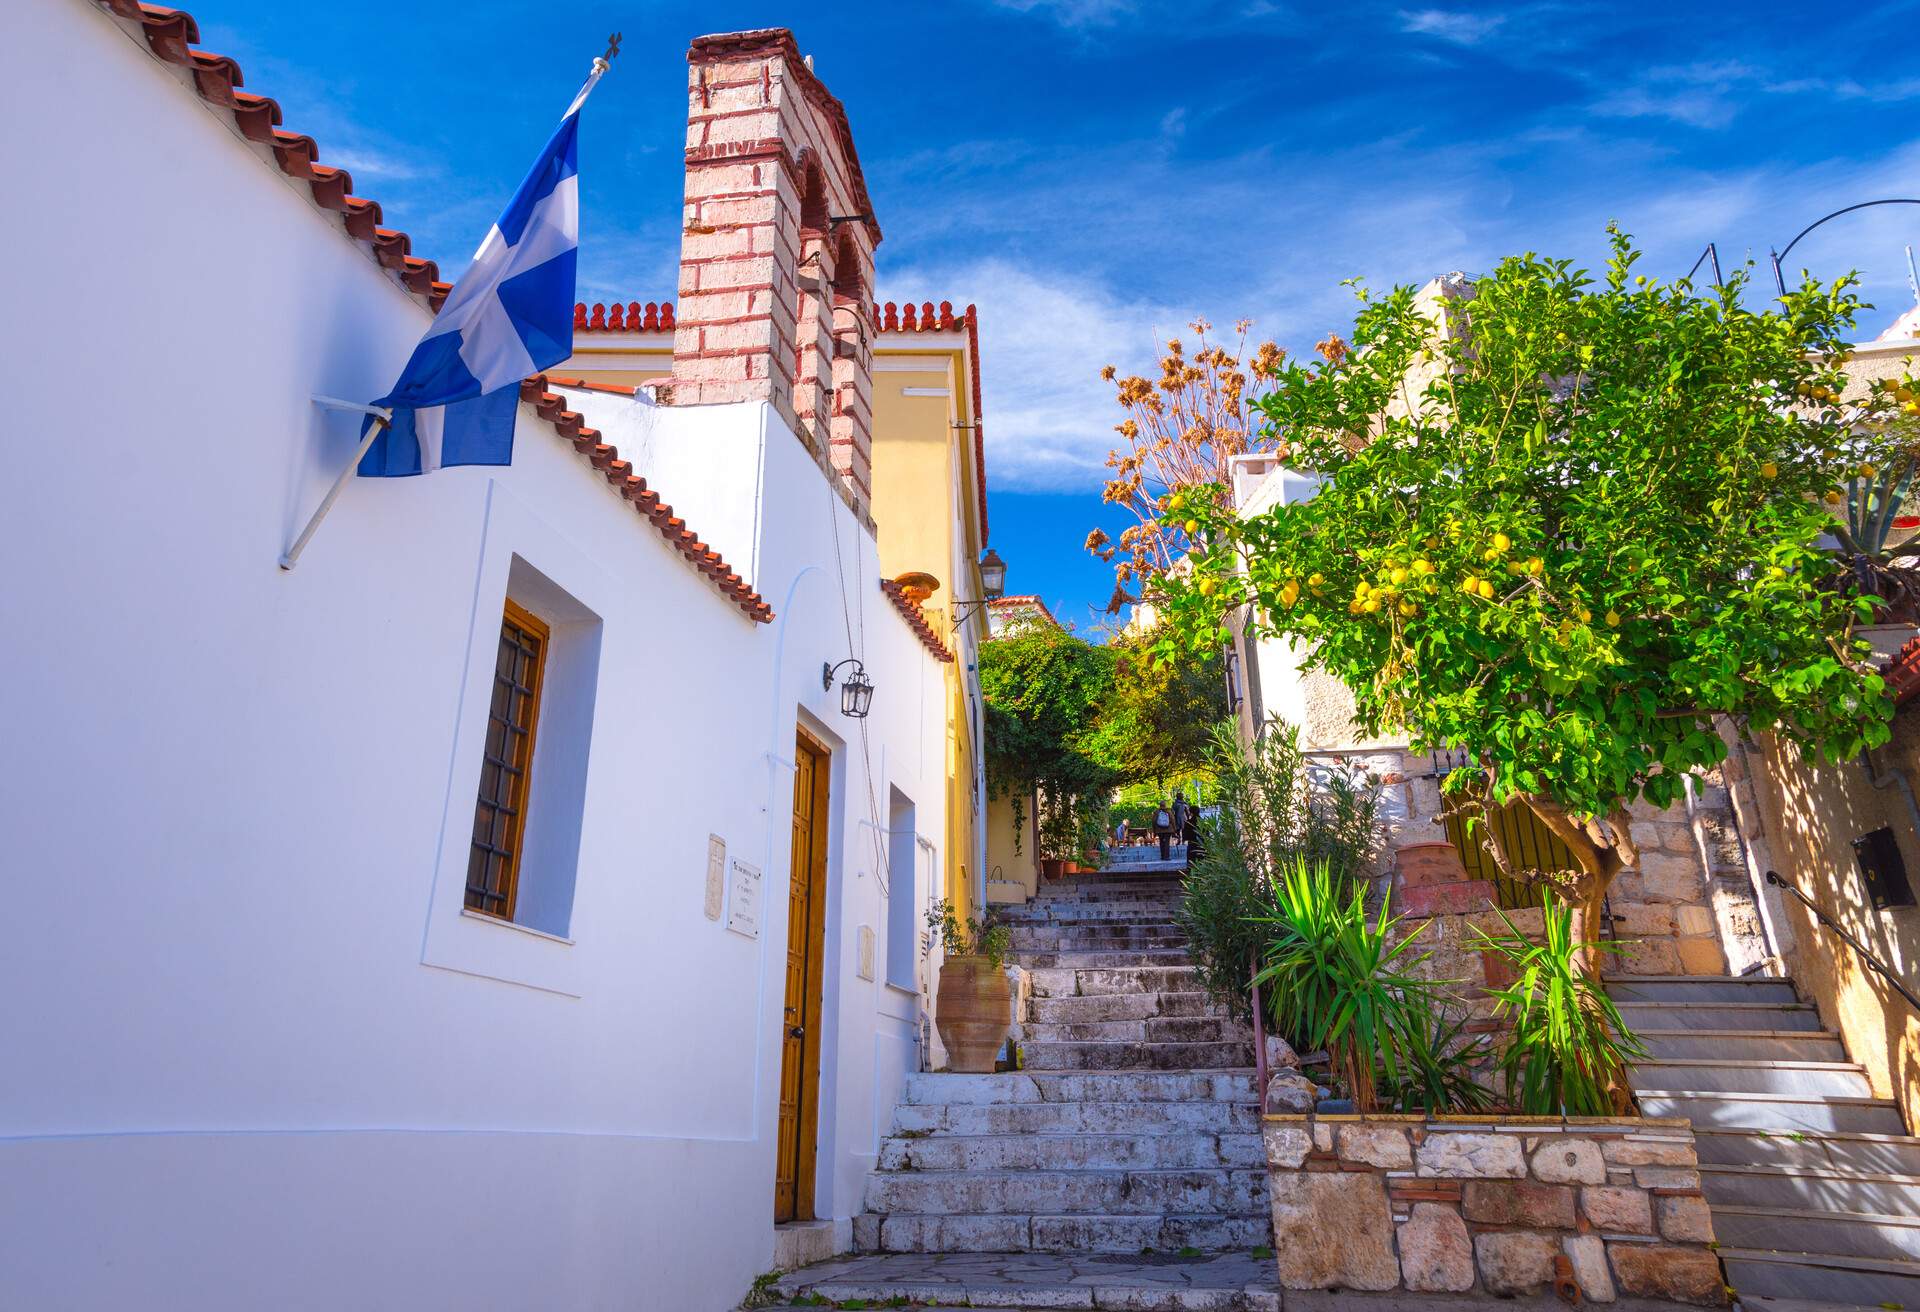 Street of Anafiotika in the old town of Athens, Greece. Anafiotika is district built by workers from the island Anafi. Popular tourist attraction.; Shutterstock ID 1007588293